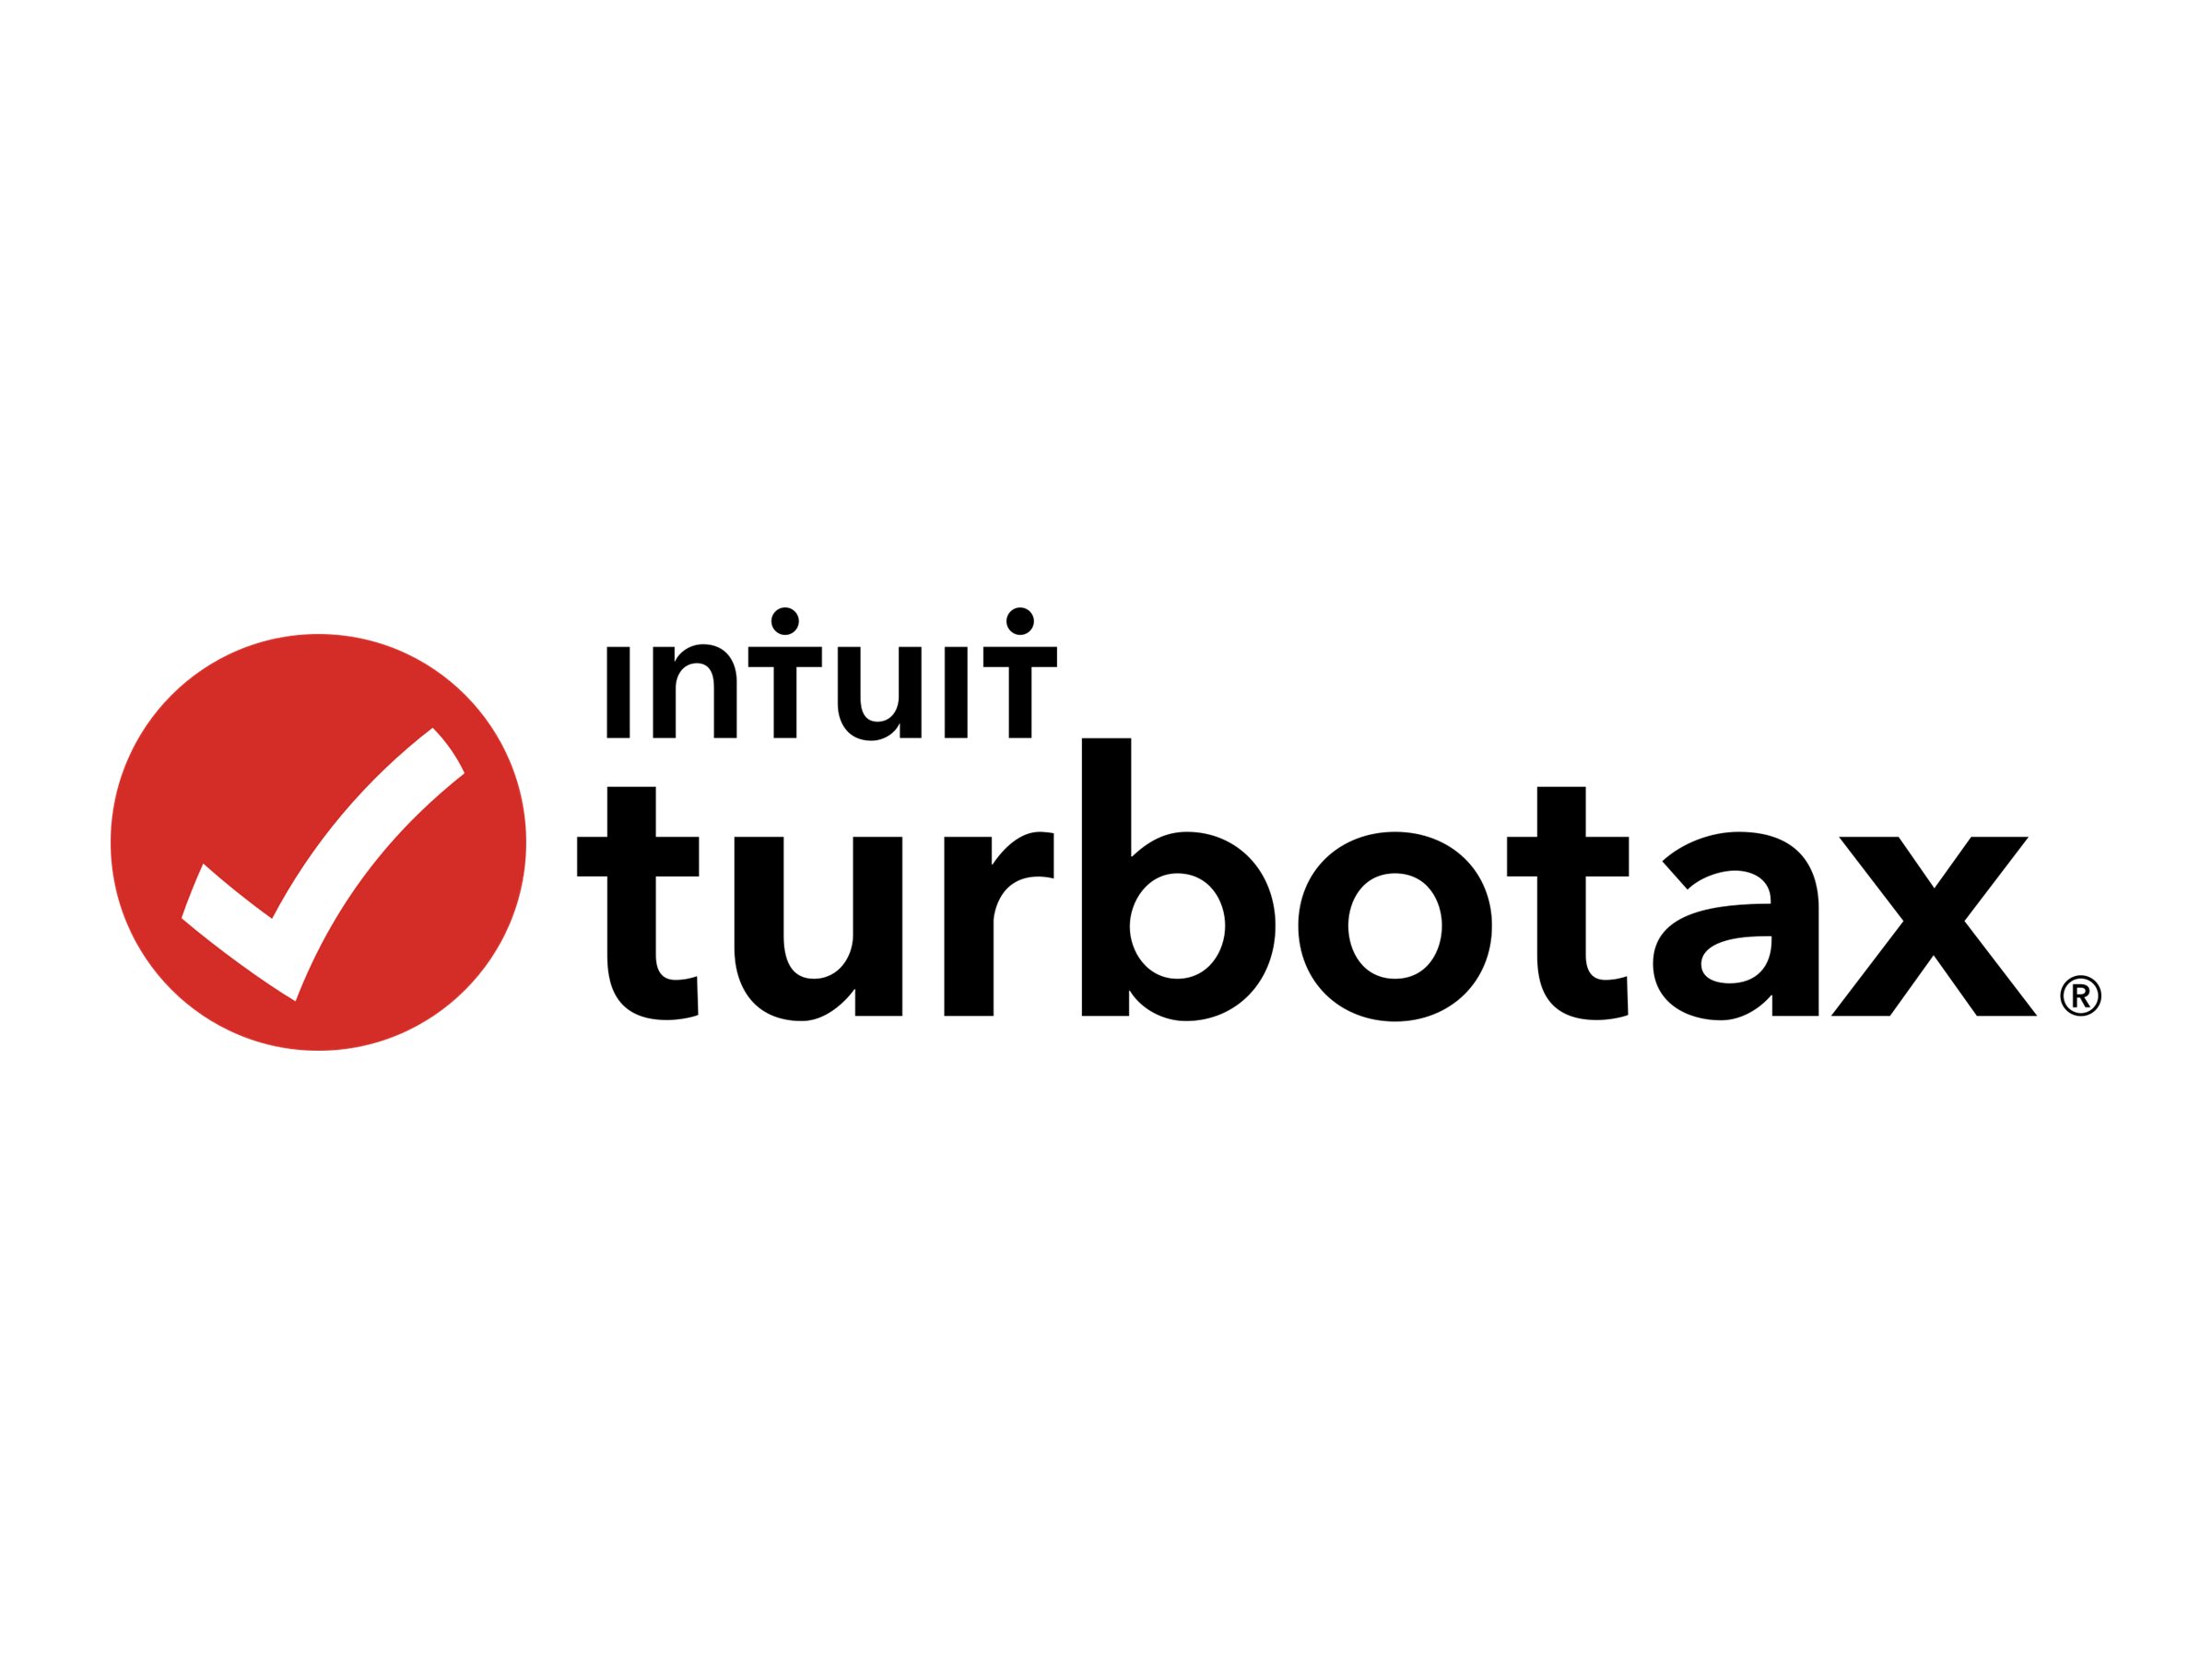 Intuit TurboTax Business Incorporated 2020 609591 London Drugs